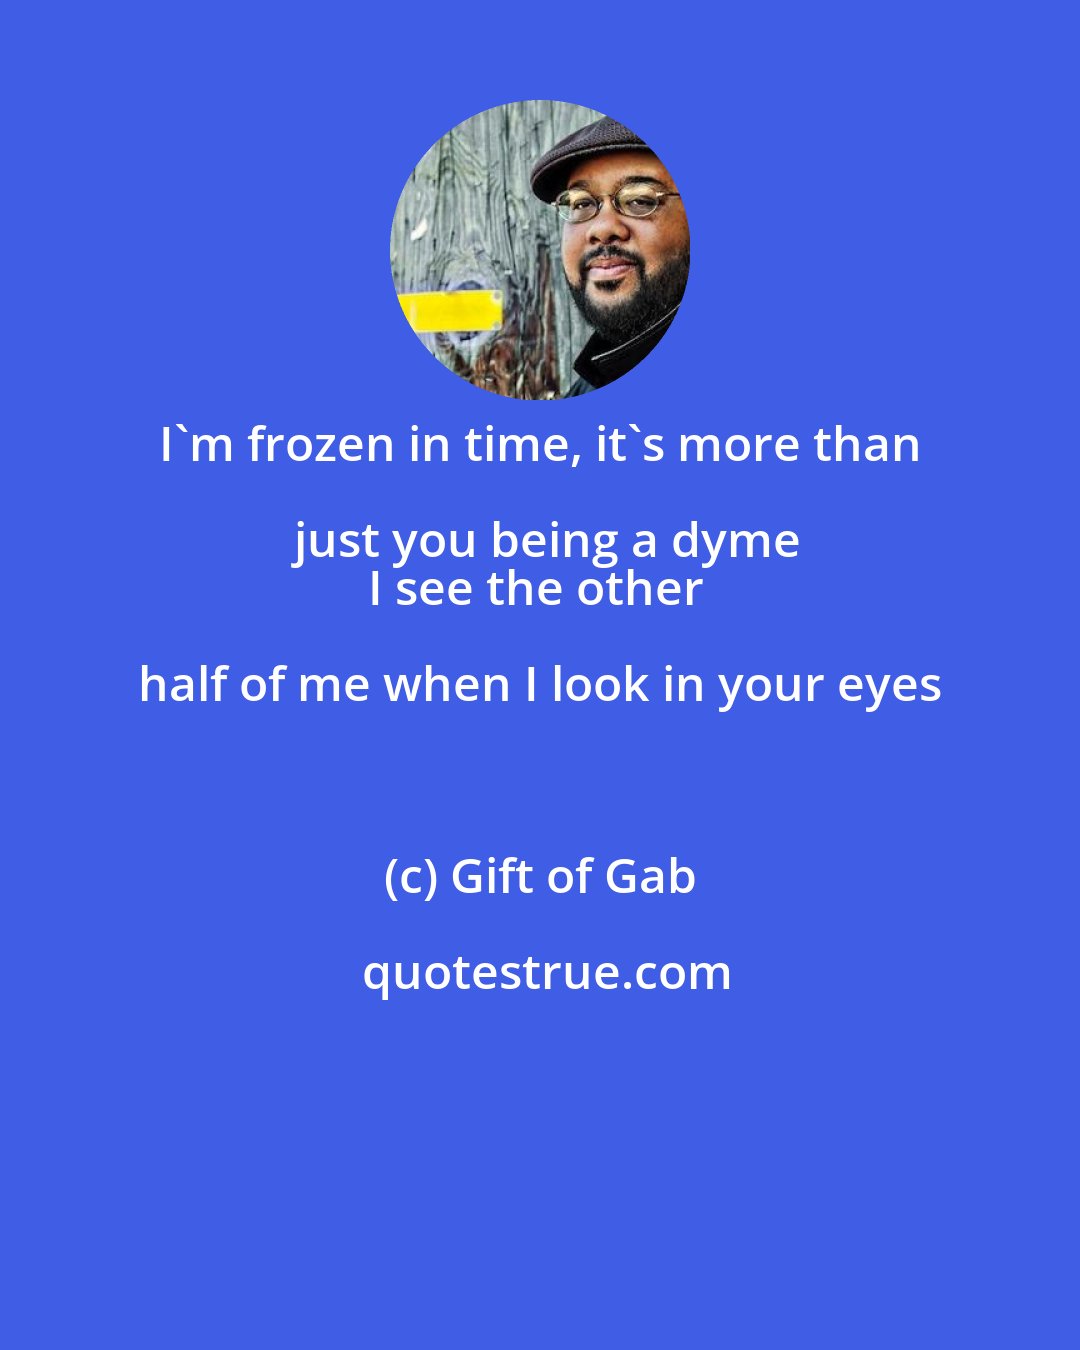 Gift of Gab: I'm frozen in time, it's more than just you being a dyme
I see the other half of me when I look in your eyes